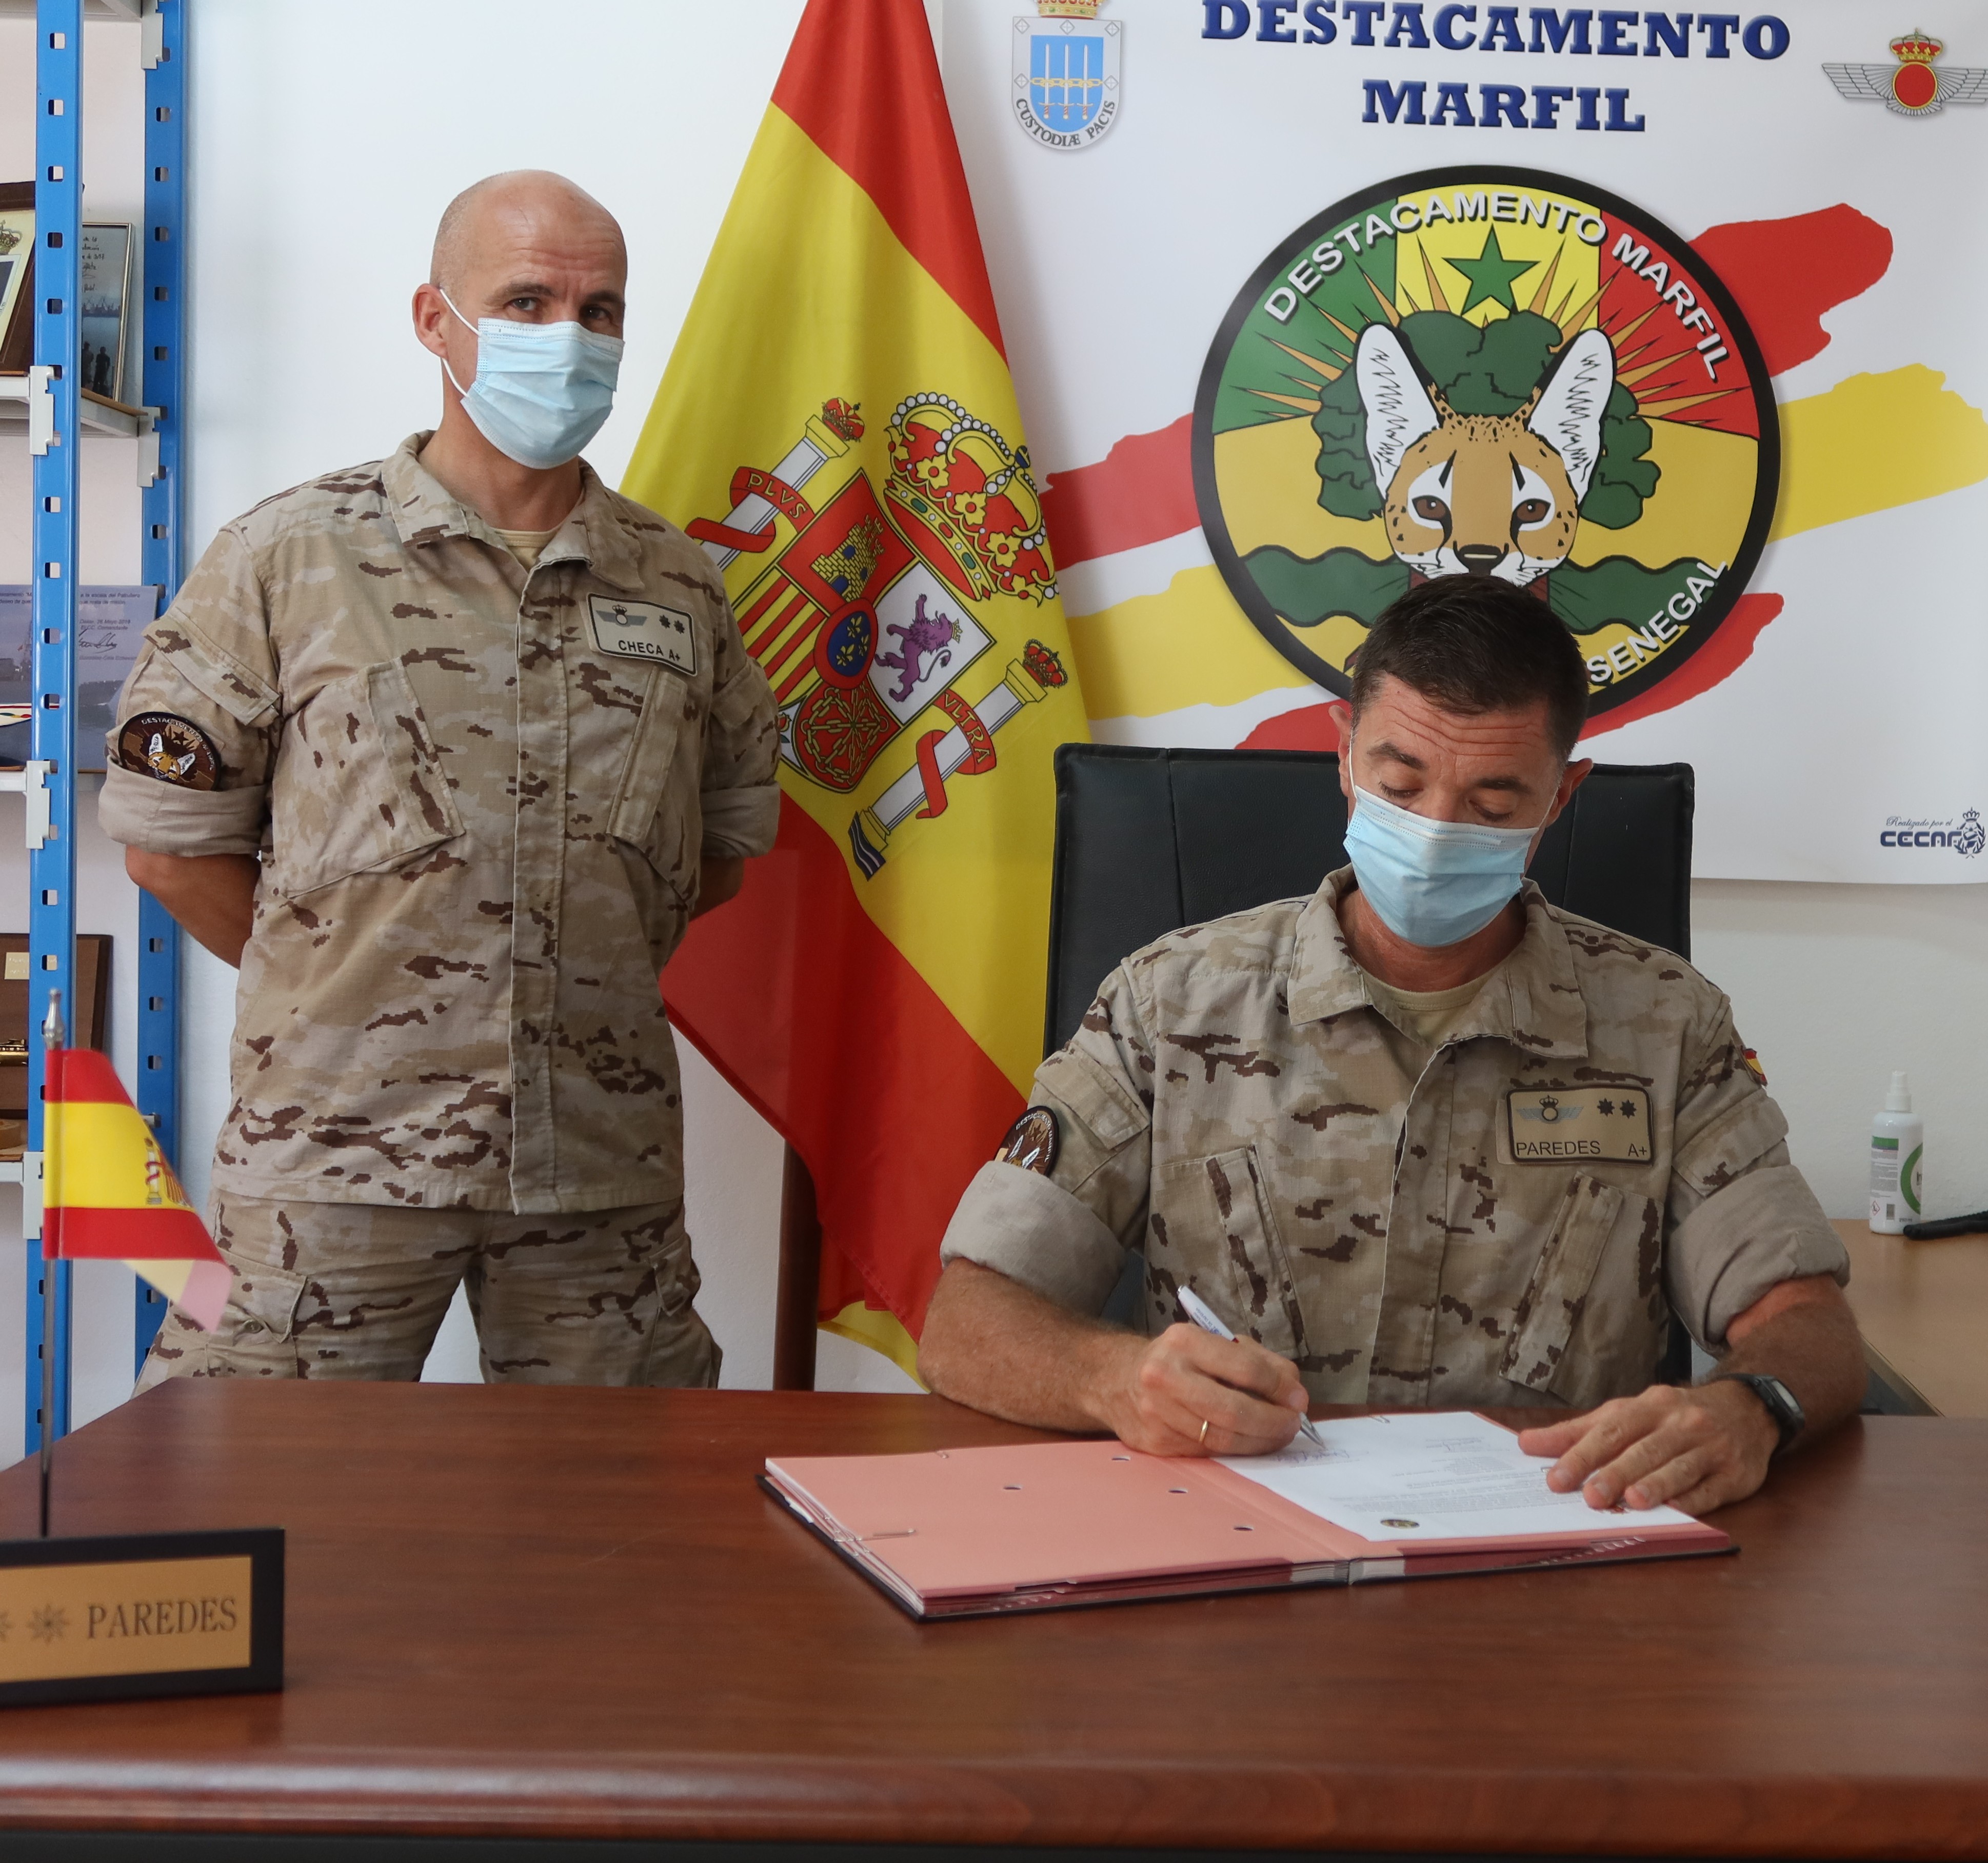 A new rotation at 'MARFIL' detachment renews Spanish effort to fight terrorism in the Sahel